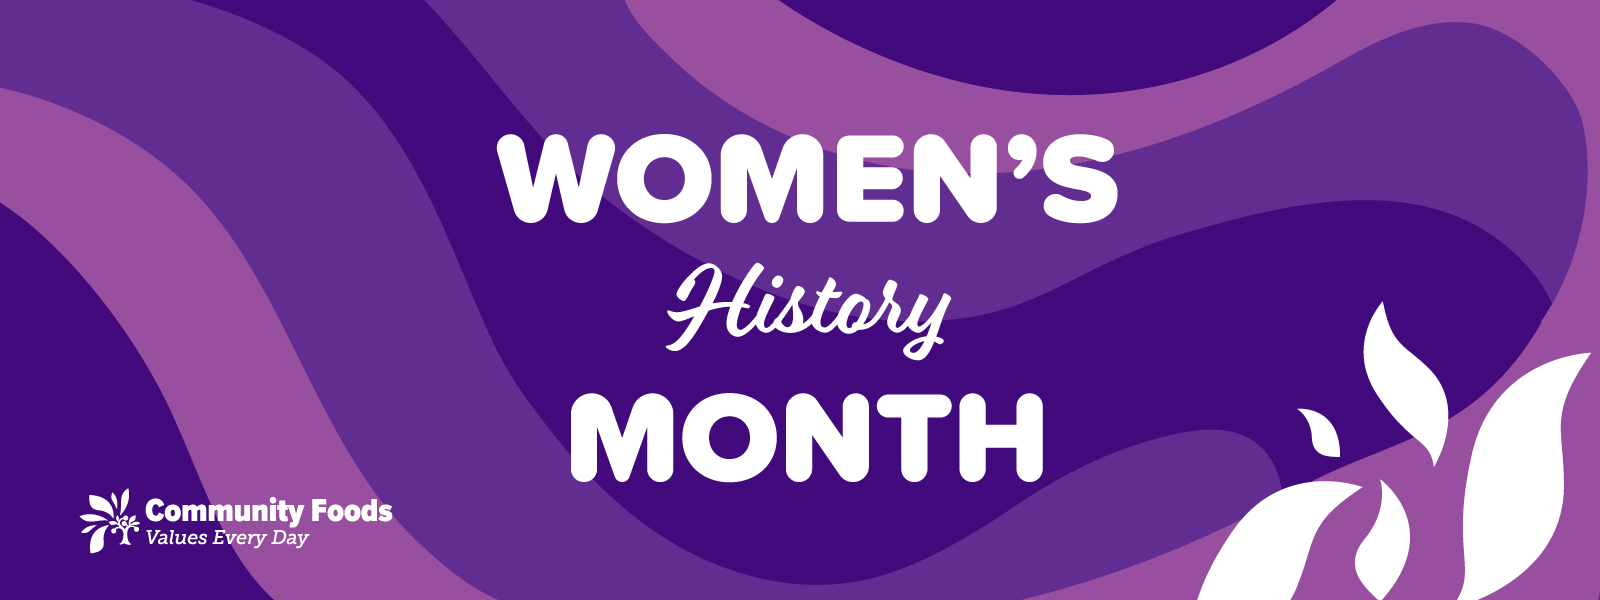 A purple graphic that says "Women's History Month"